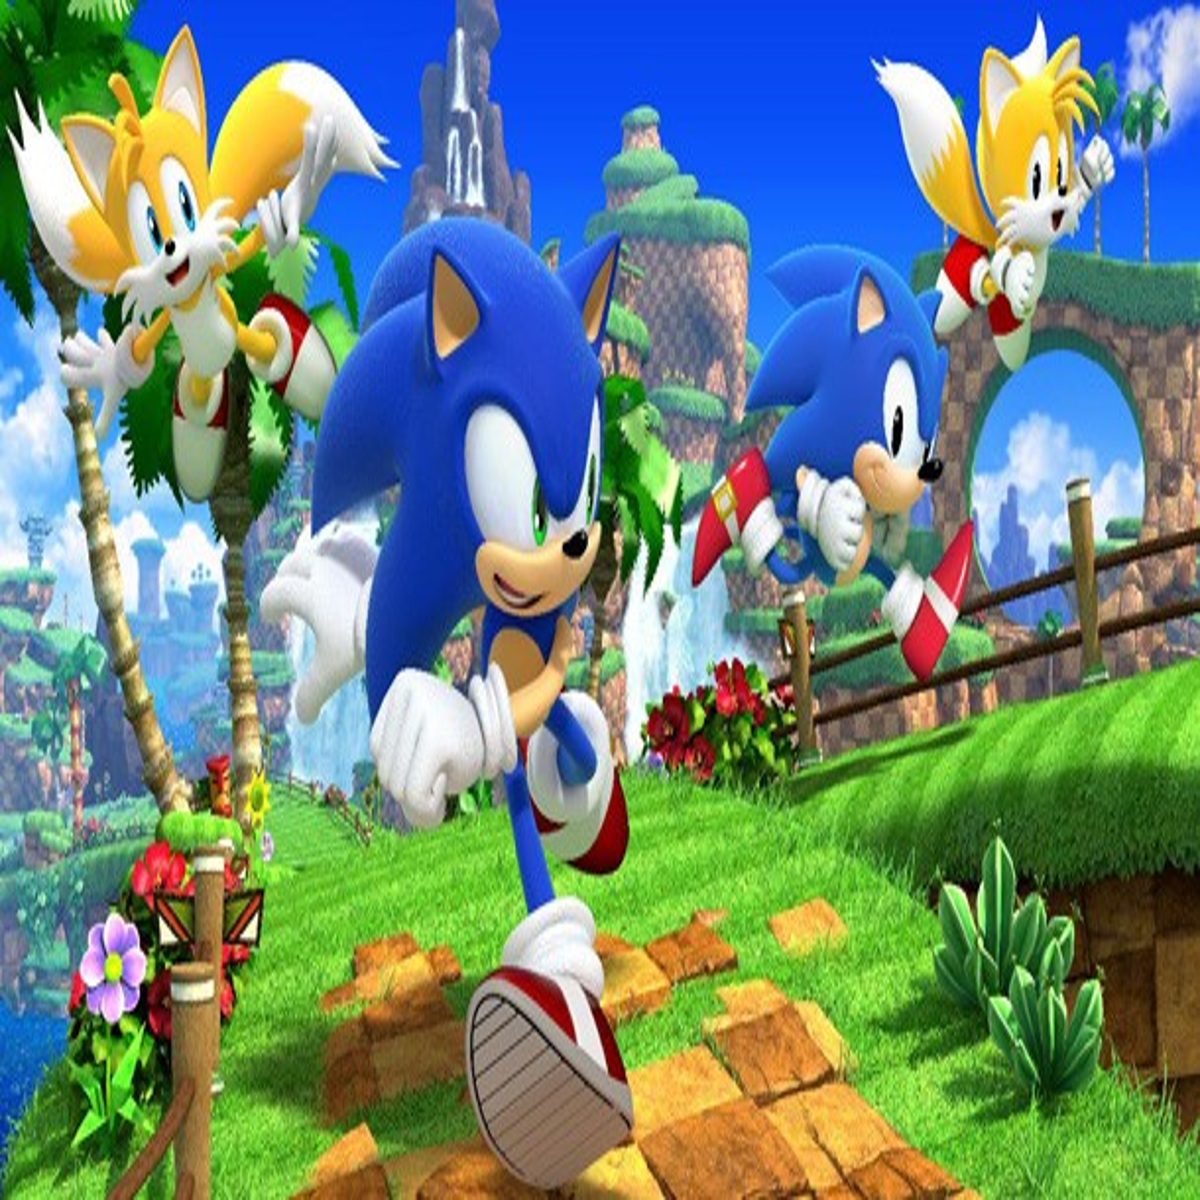 Pick One: Which Is Your Favourite Sonic Game On Xbox?